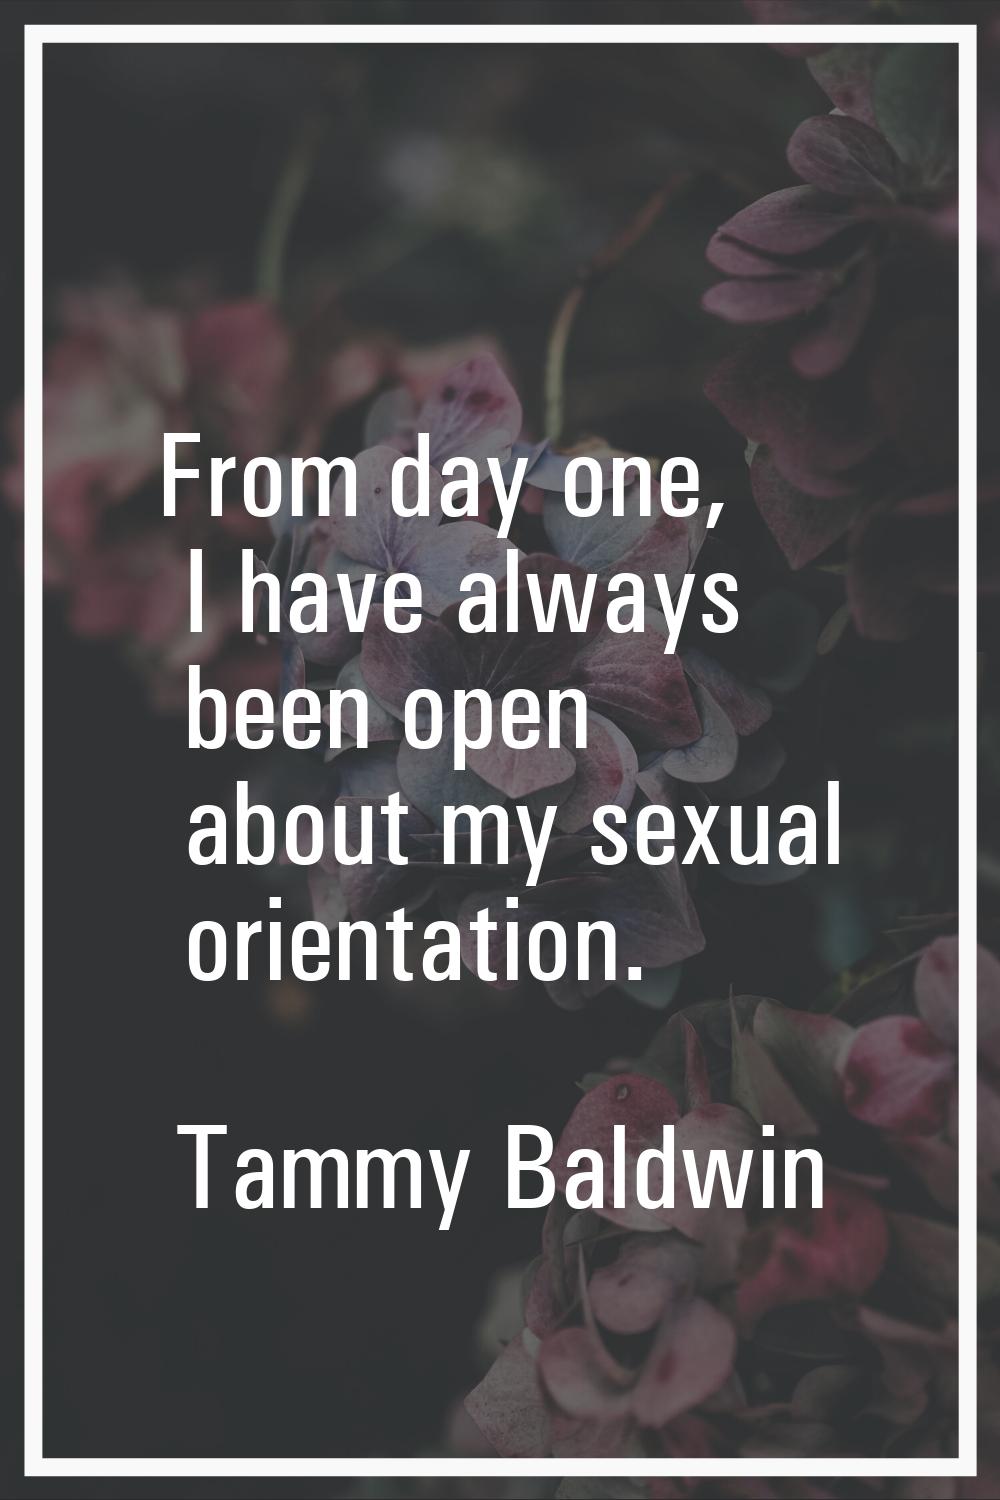 From day one, I have always been open about my sexual orientation.